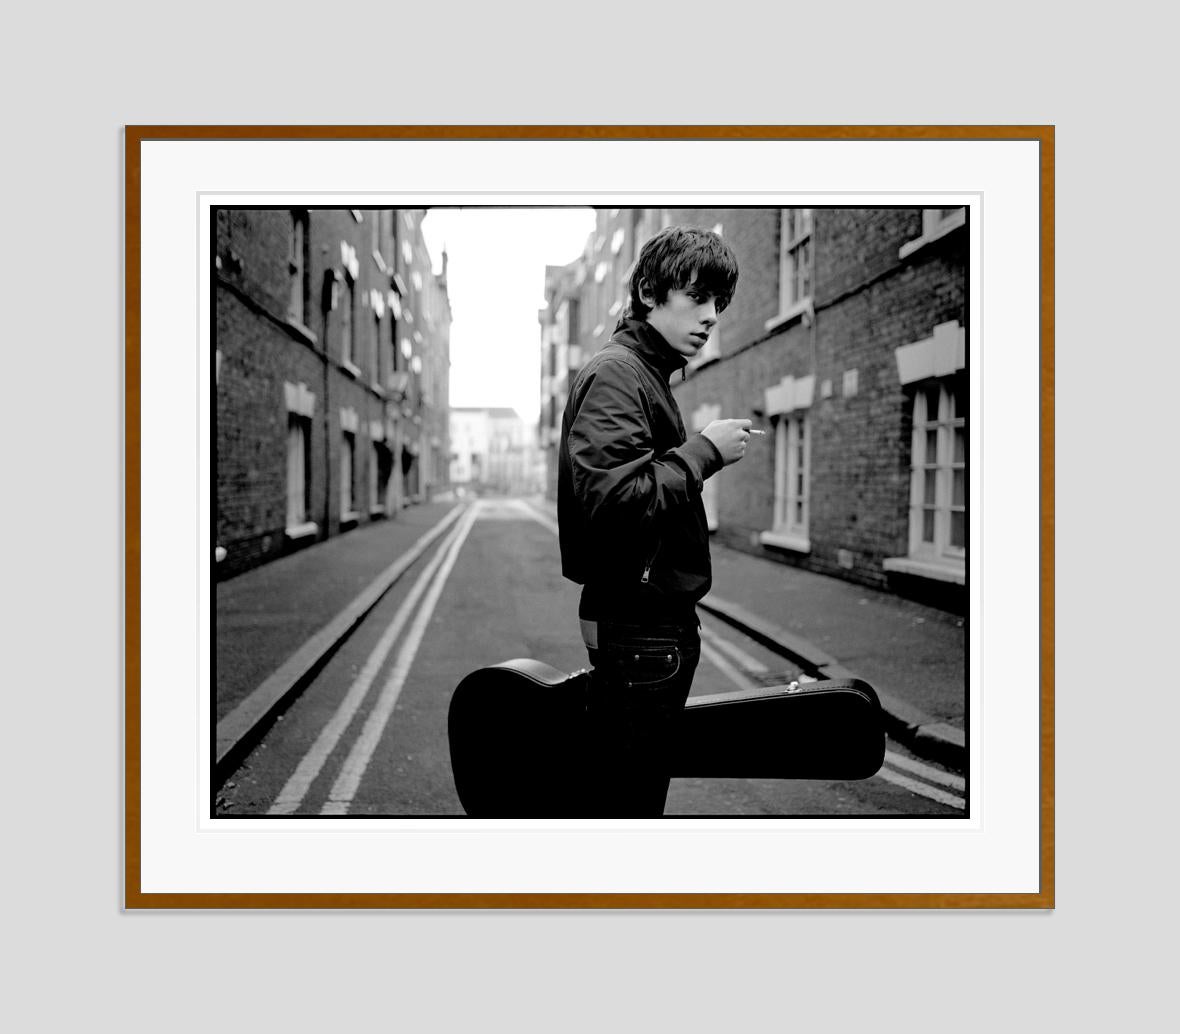 Jake Bugg

2012

by Kevin Westenberg
Signed Limited Edition

Kevin Westenberg is famed for his creation of provocative and electrifying images of world-class musicians, artists and movie stars for over 25 years.

His technique of lighting, colour